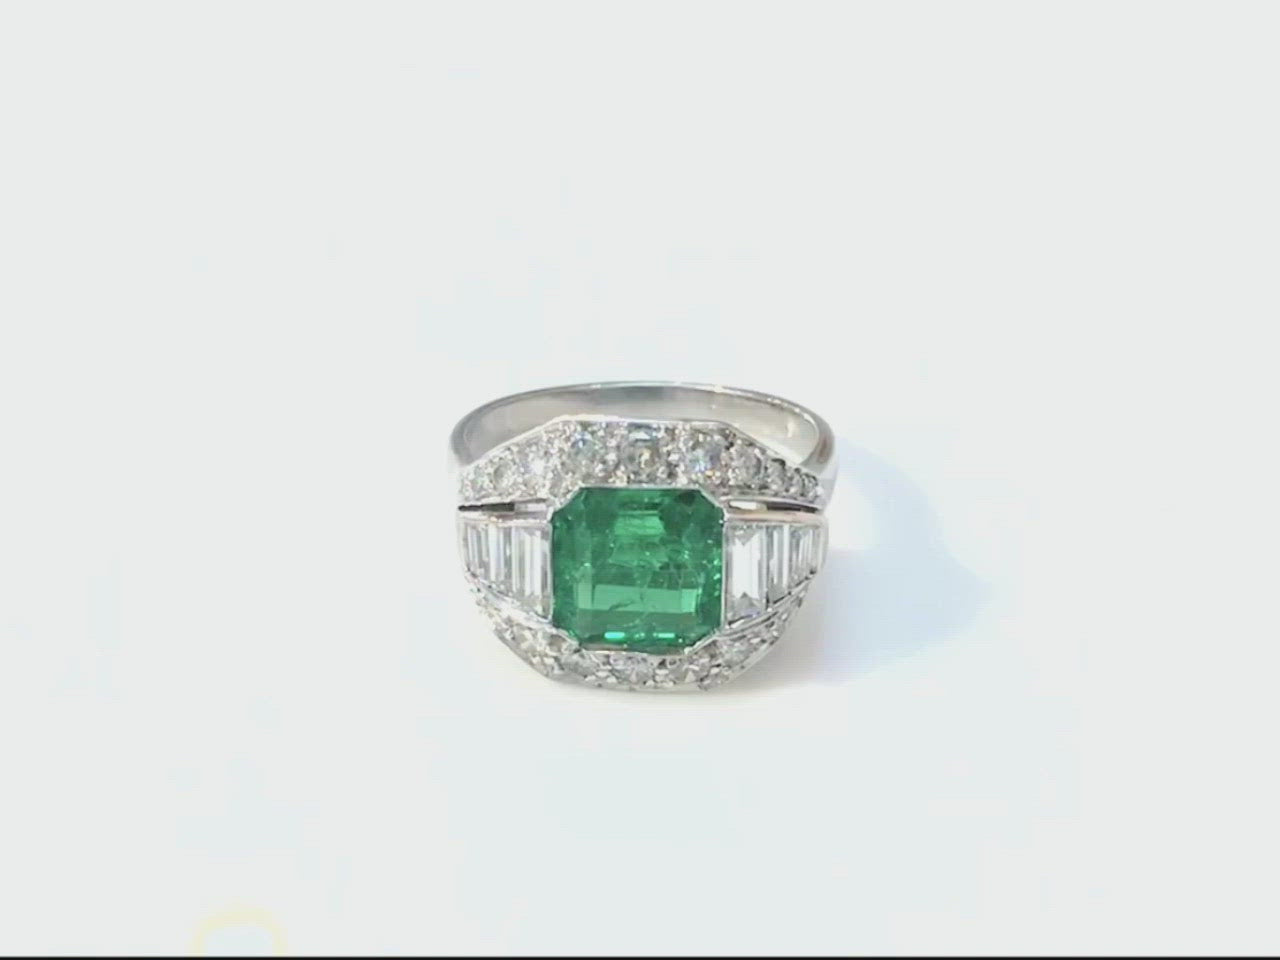 An emerald and diamond Art Deco engagement ring from the 1920s.